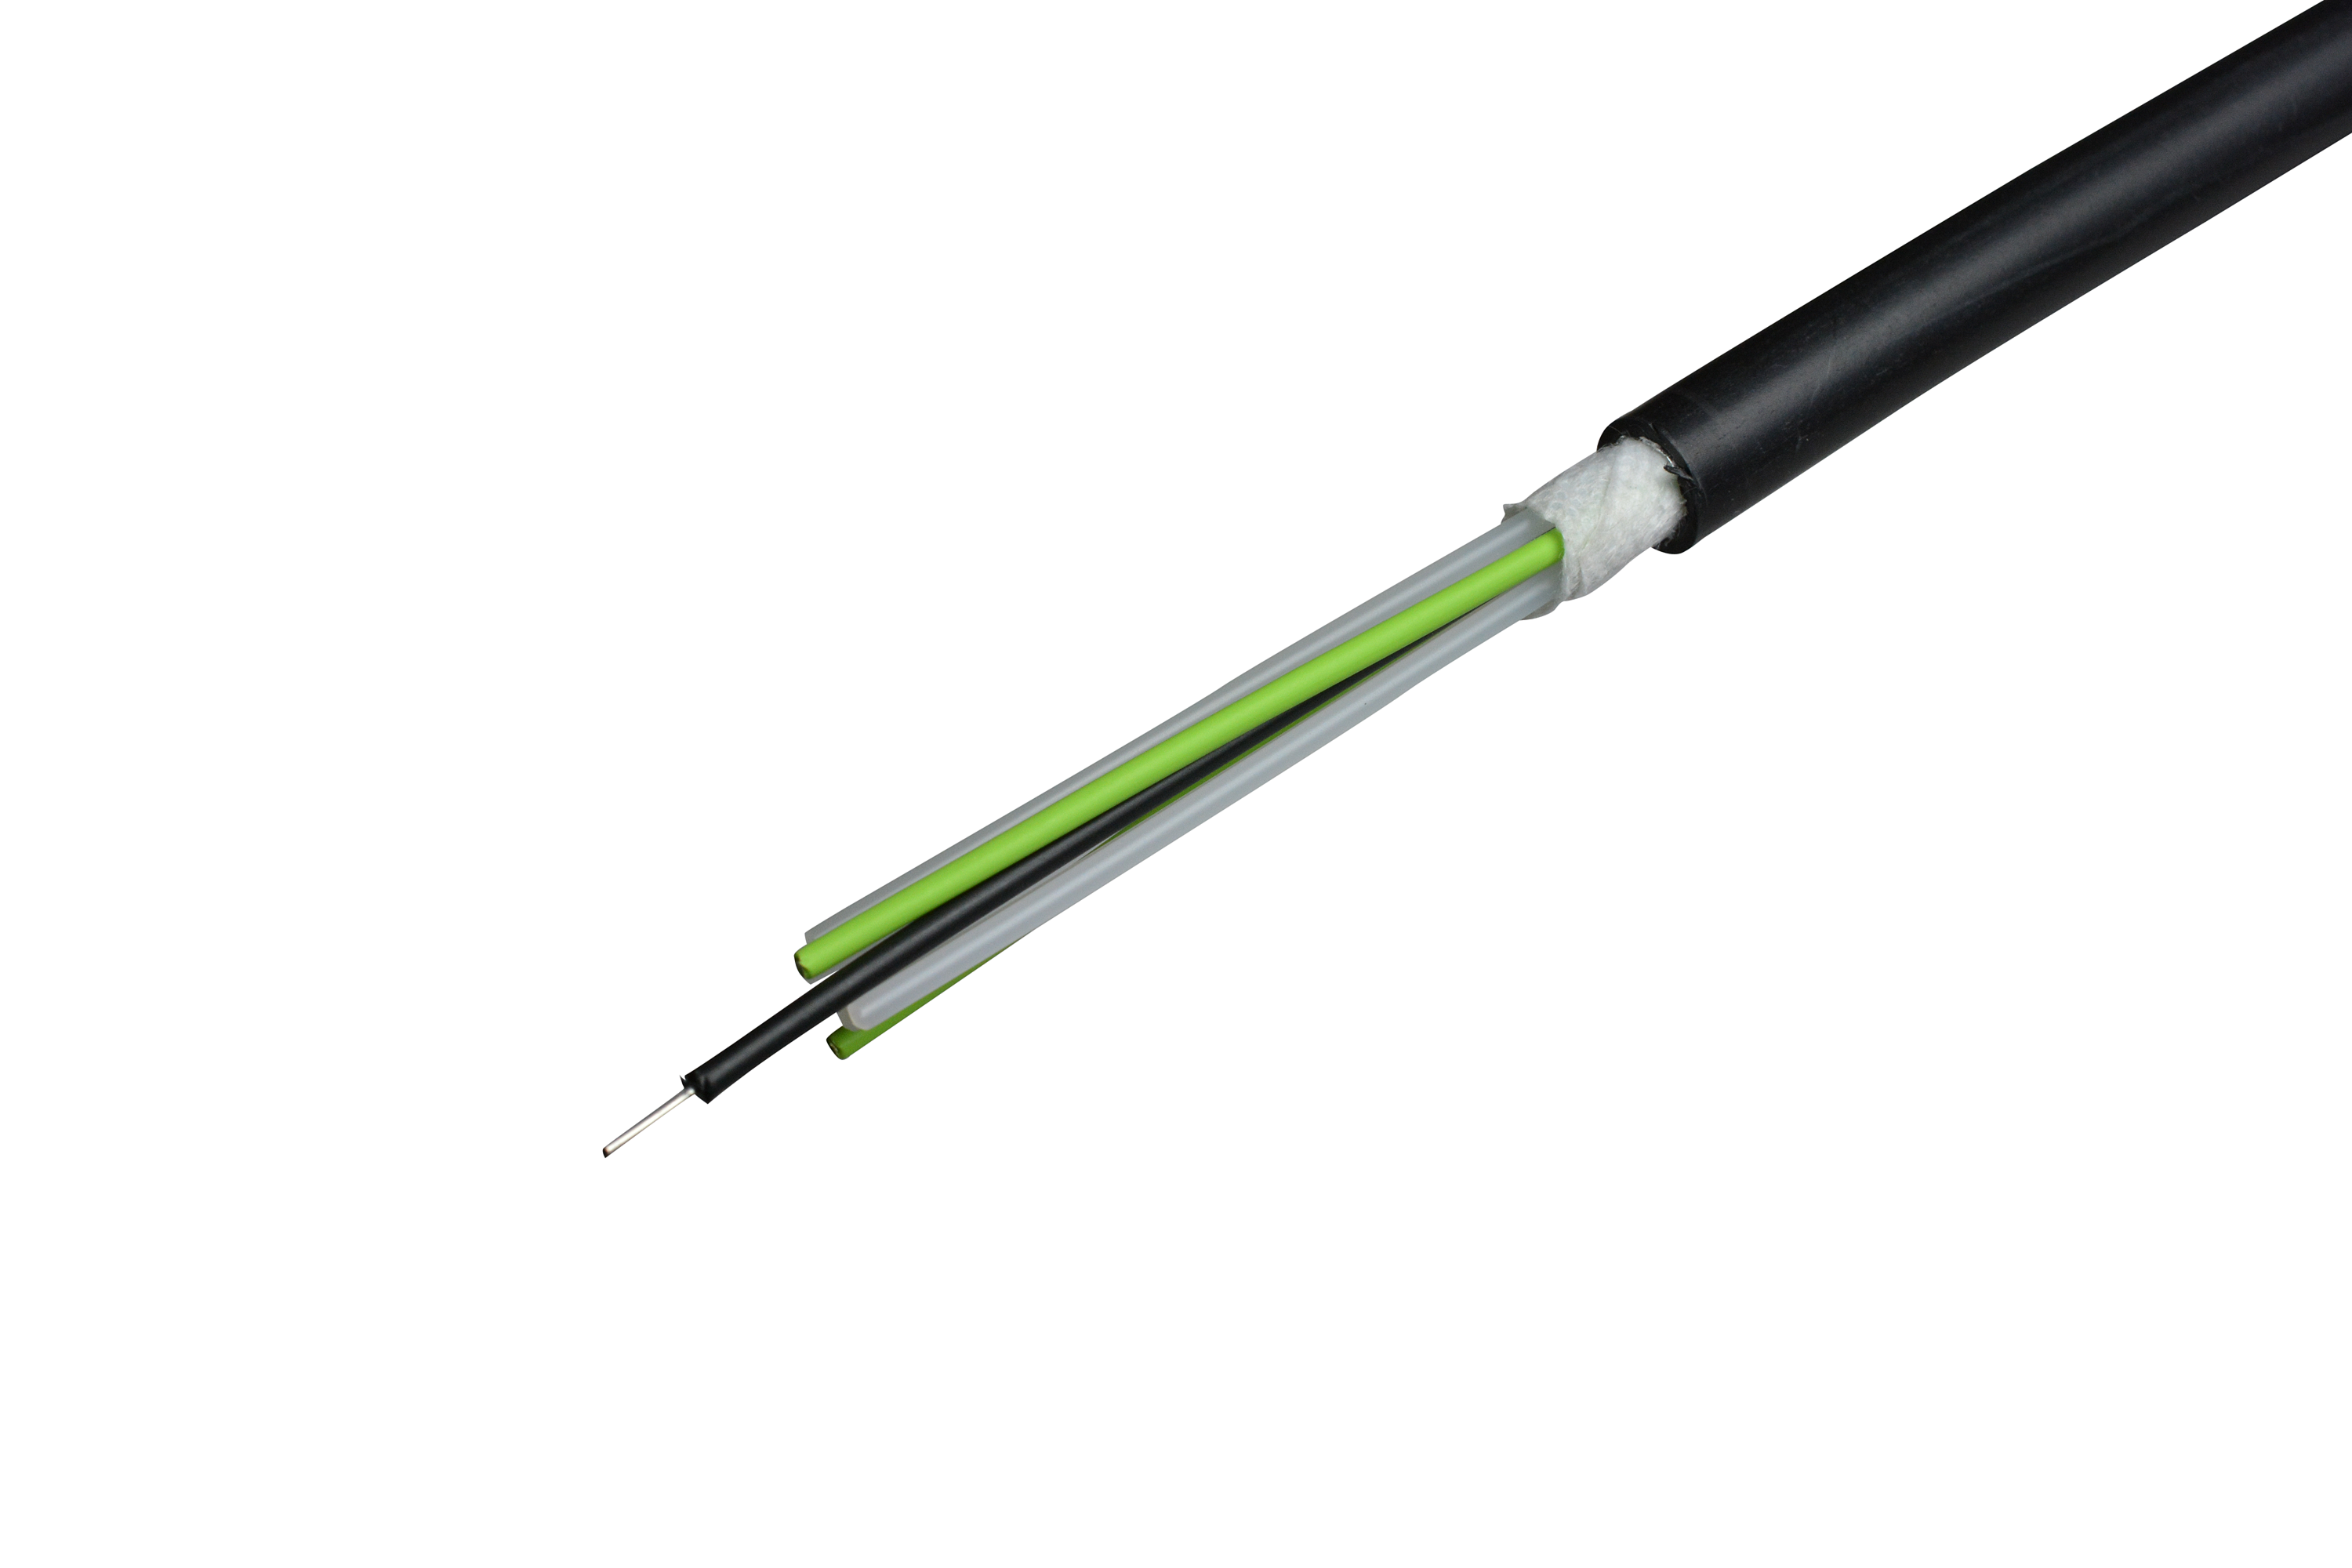 4cores,OM3,Unitized Round Type Fiber Optic Cable for Indoor and OutdoorUse.